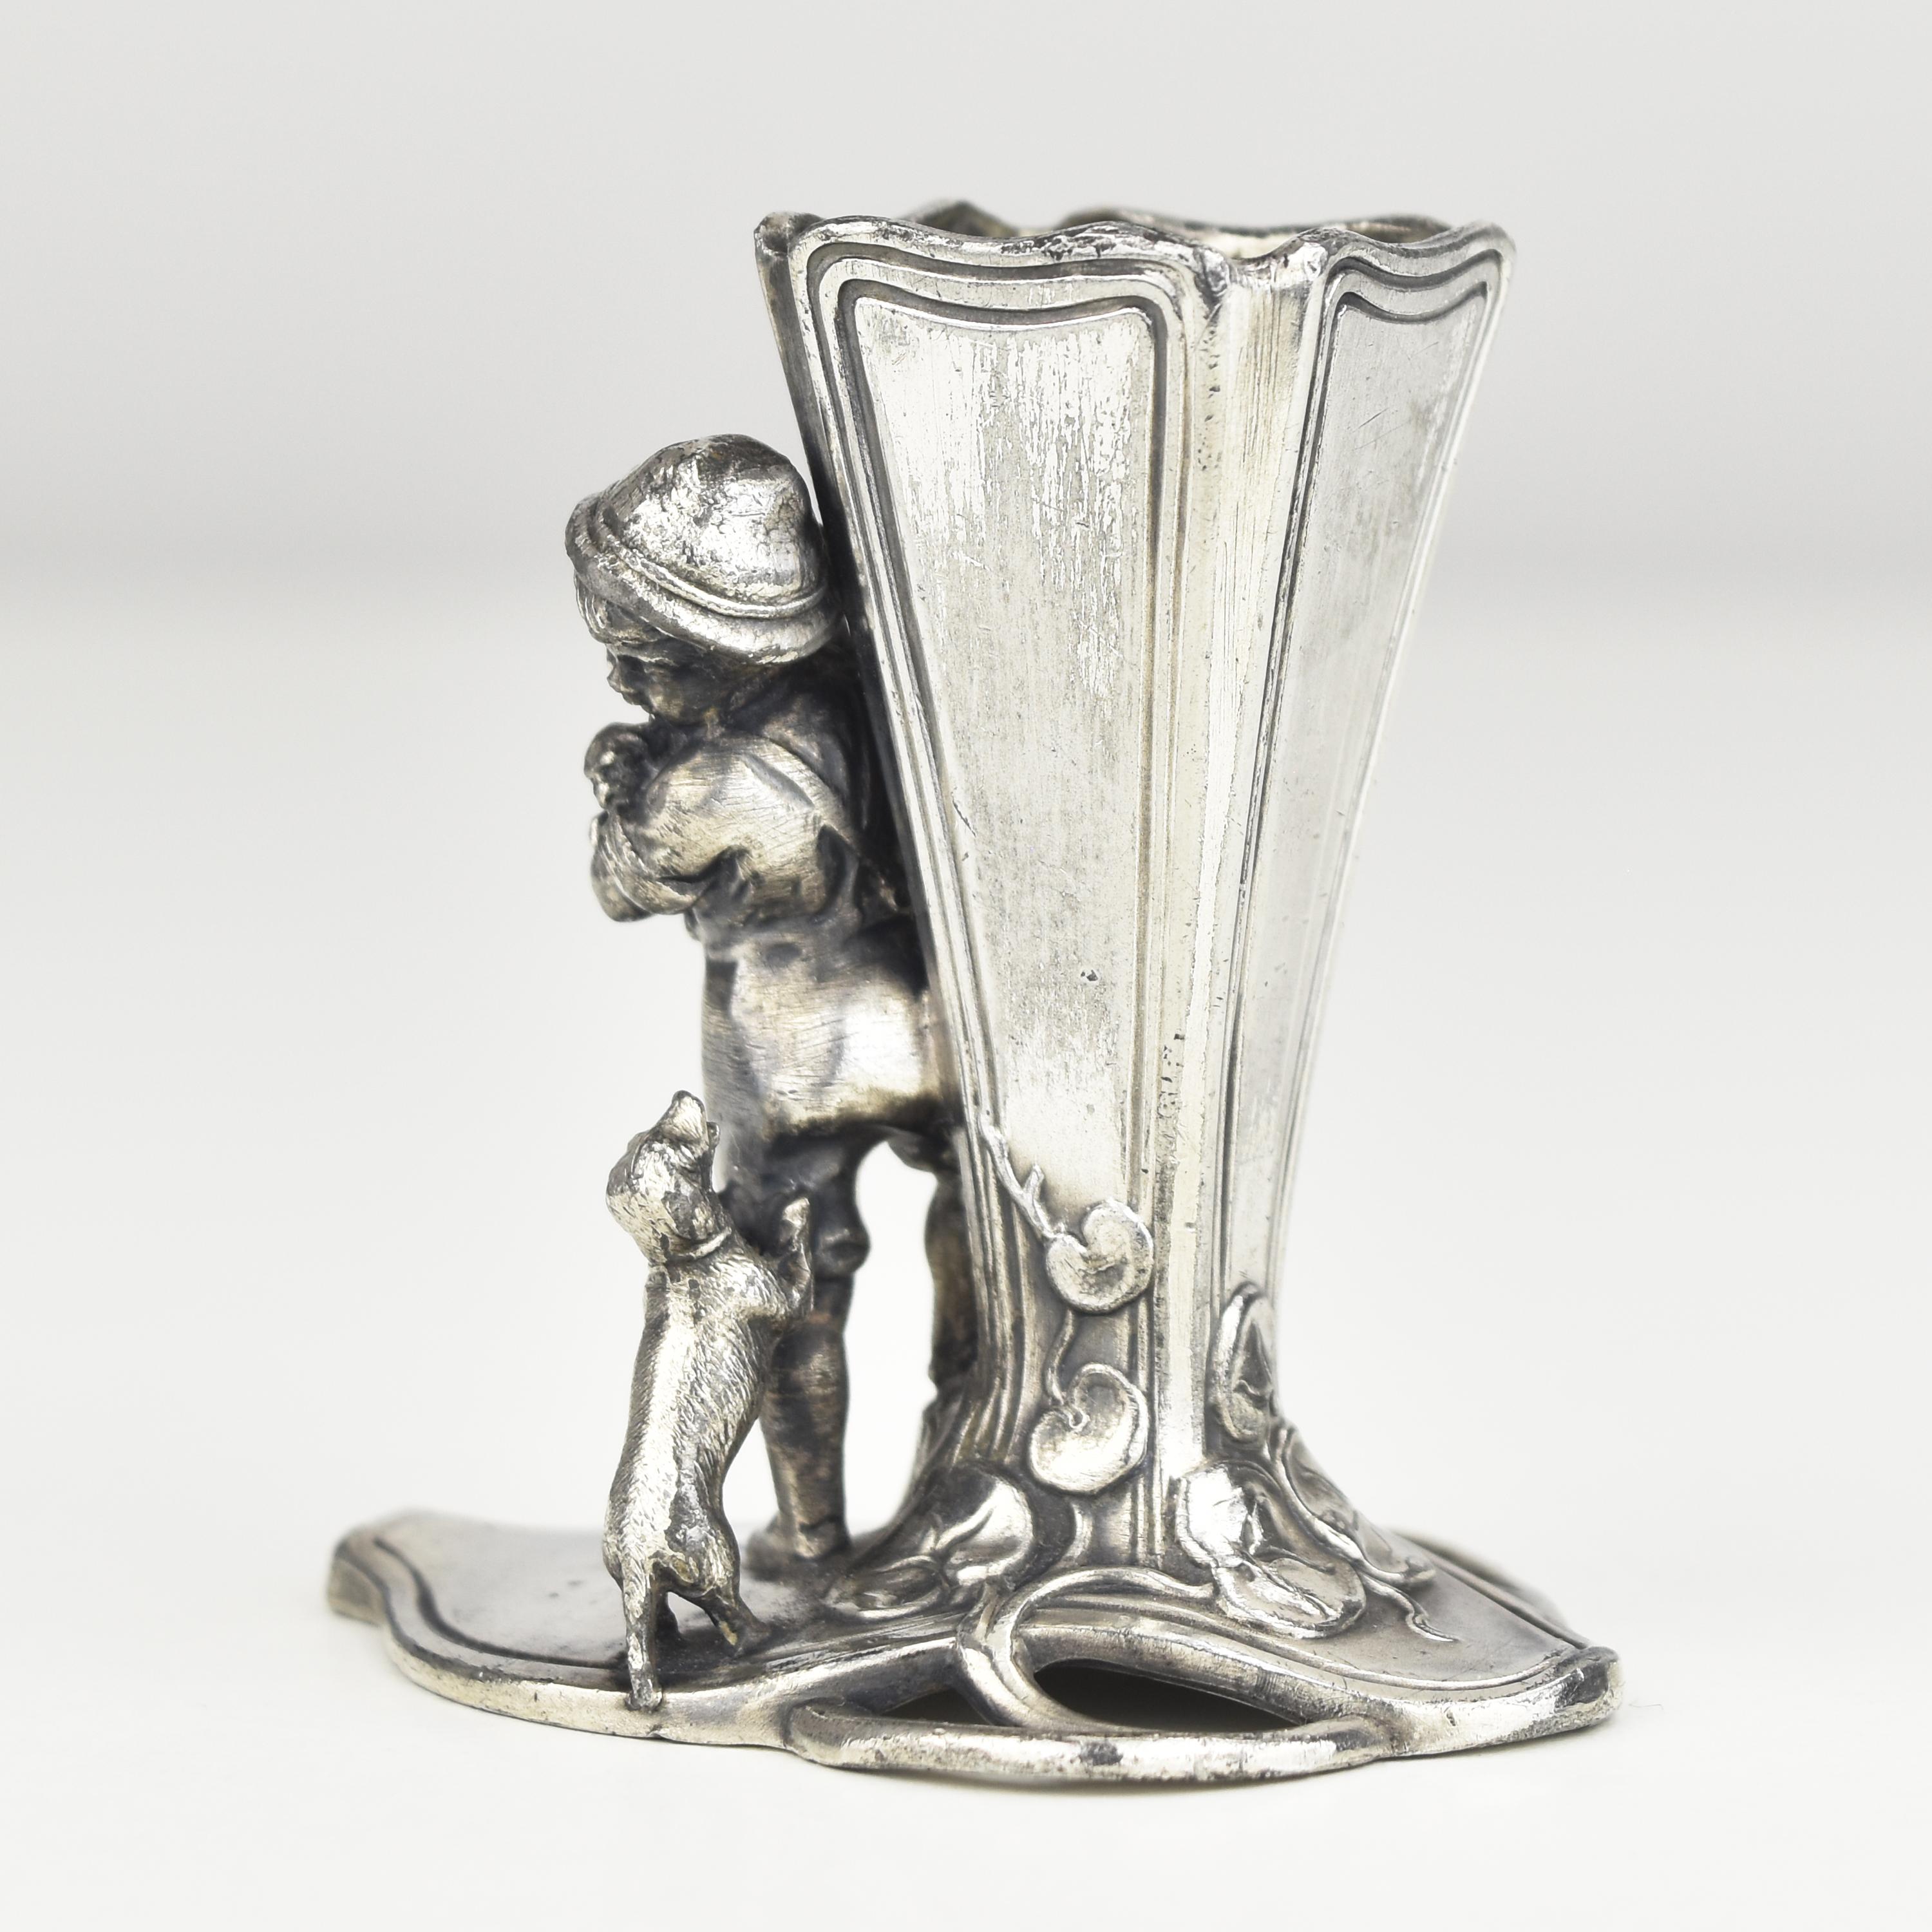 Figurative Toothpick Holder Stand WMF Art Nouveau Antique Silverplated In Good Condition For Sale In Bad Säckingen, DE